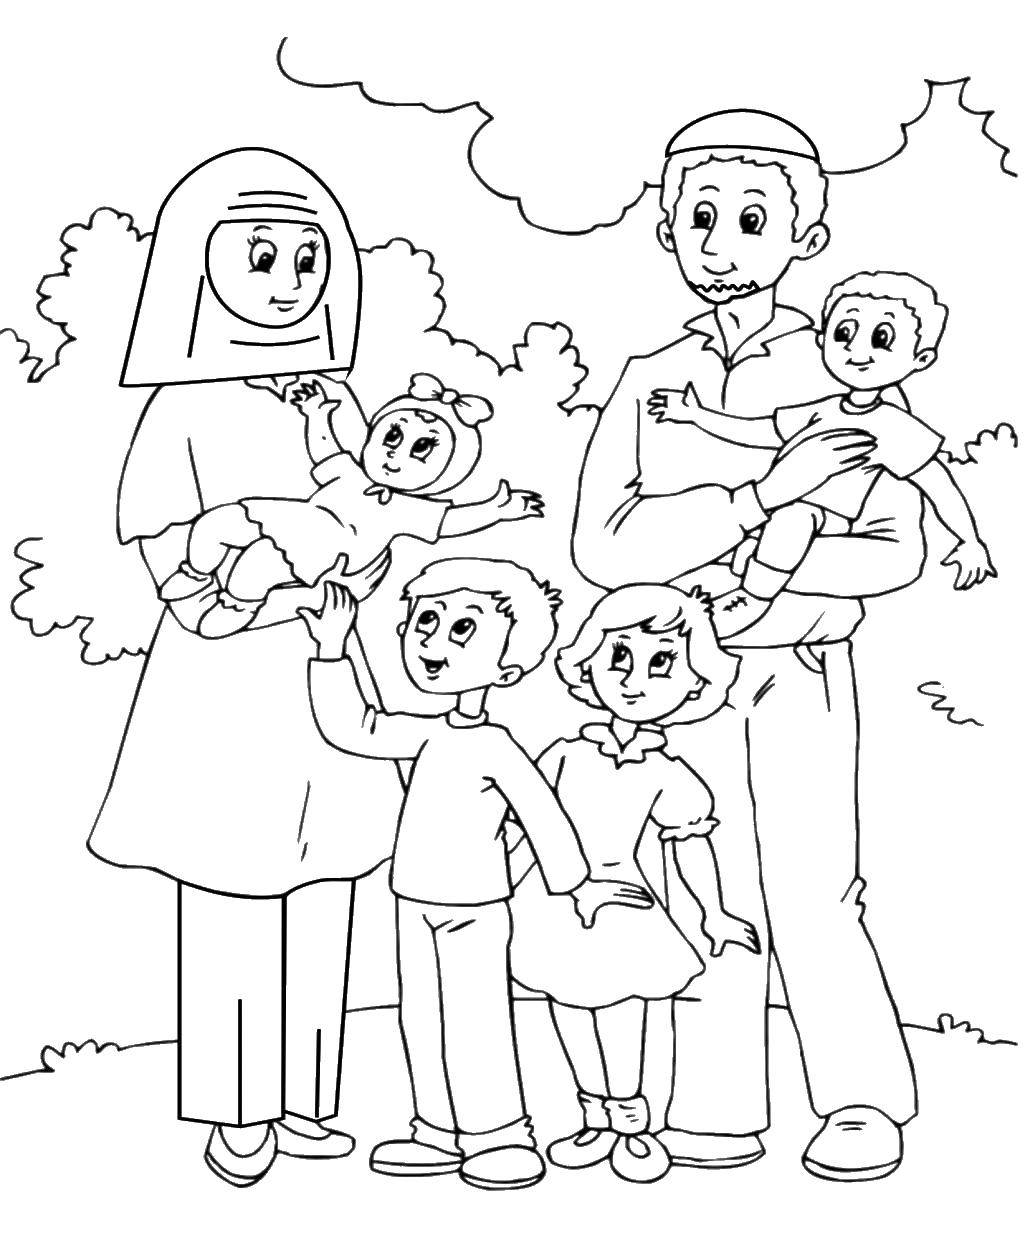 Coloring Religious family. Category Family members. Tags:  Family, parents, children.